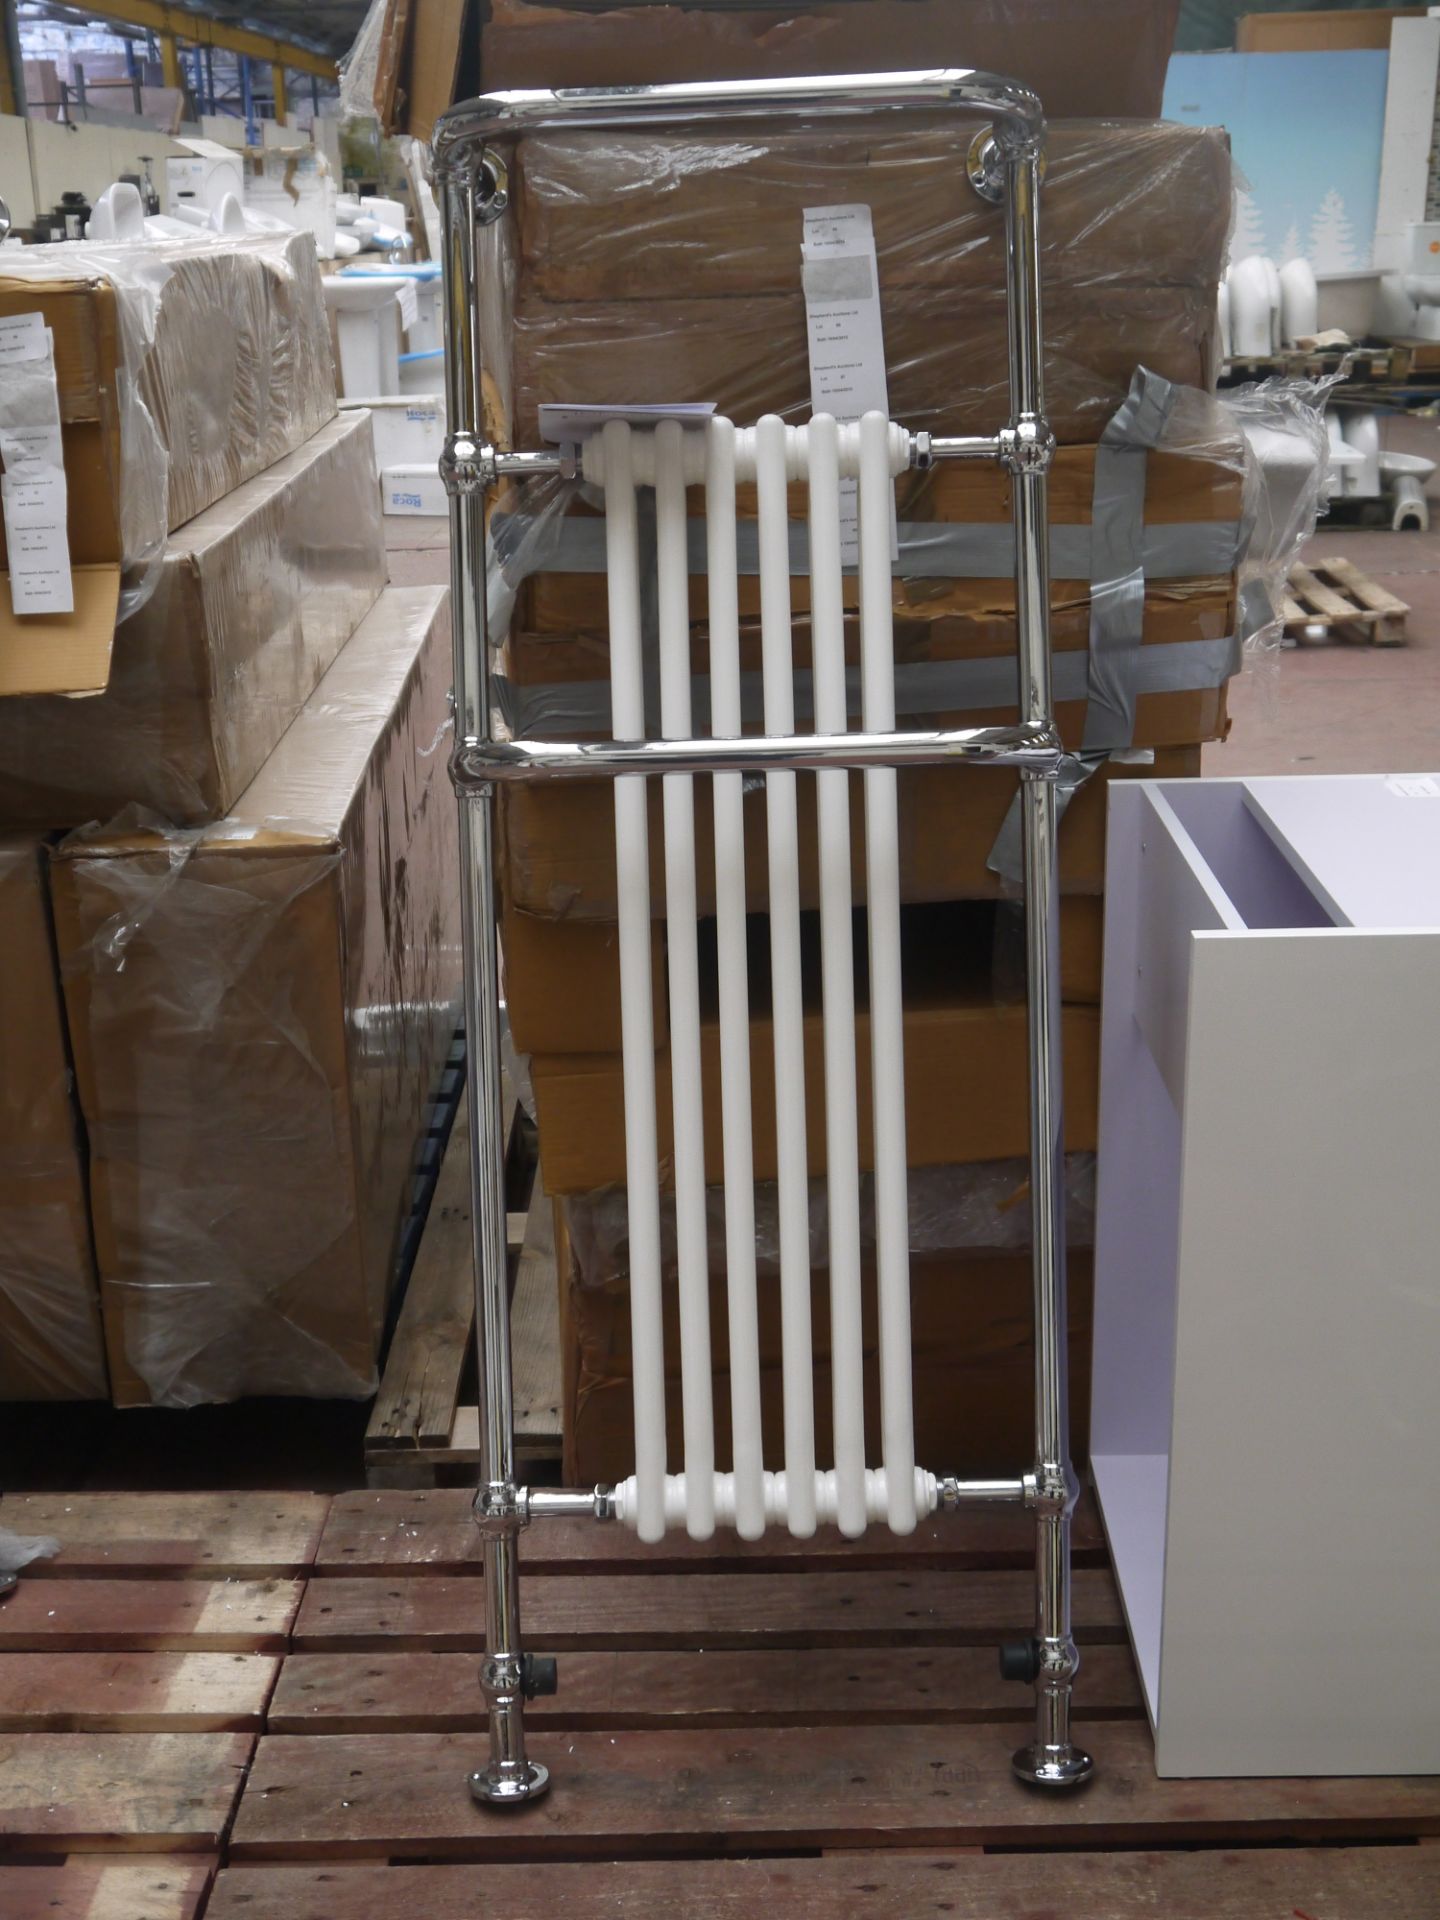 Imperial Malmo 6 bar chrome plated brass 1500 floor standing radiator, new and boxed RRP £952 at